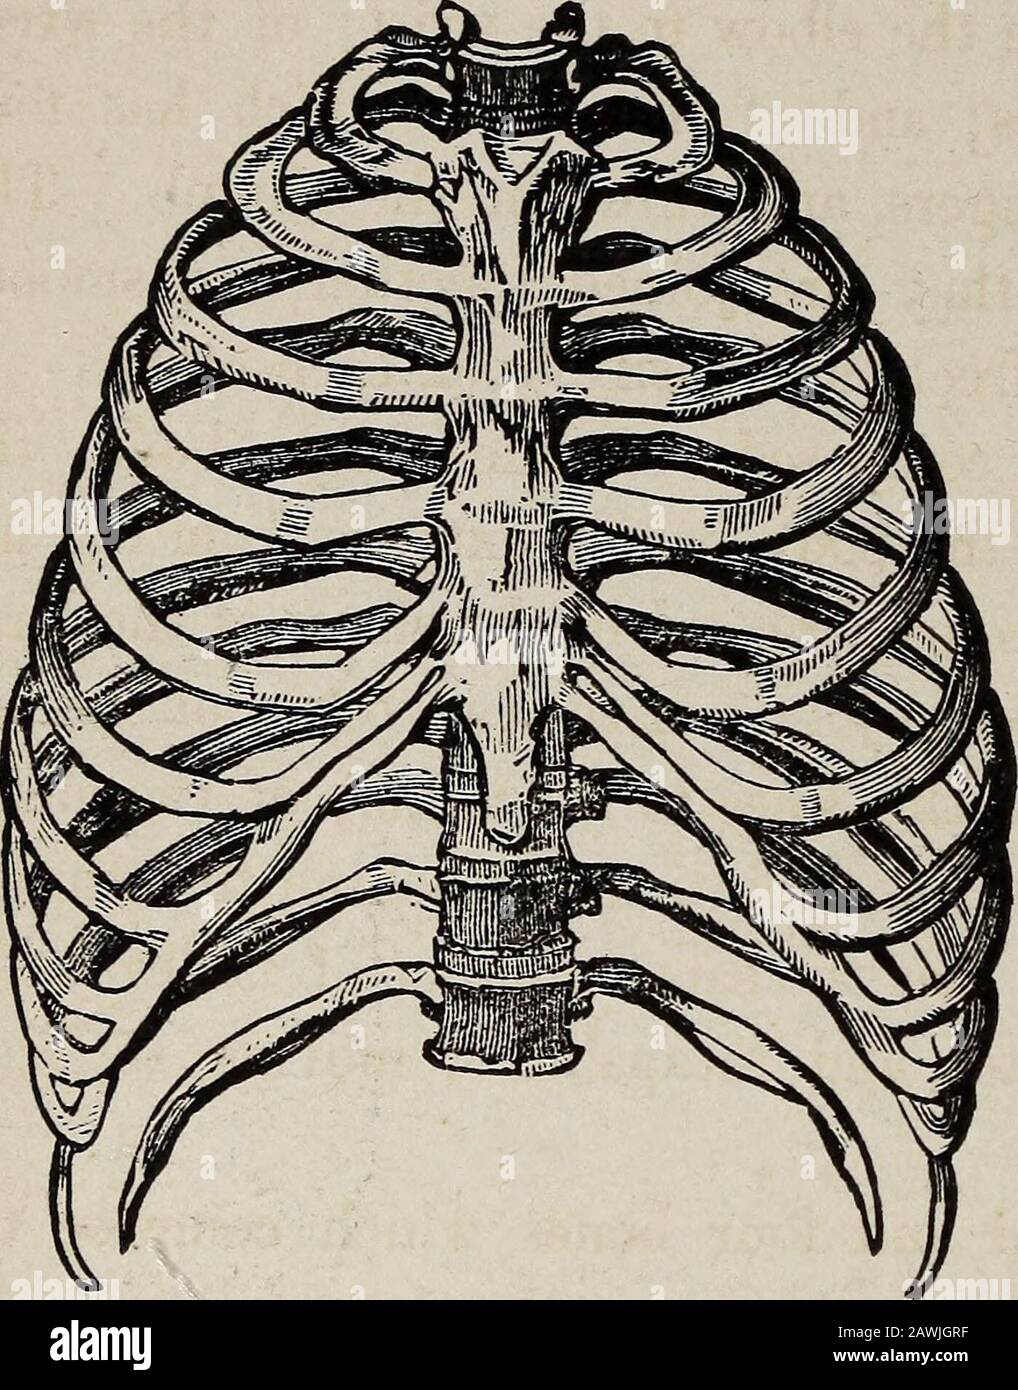 The body and its ailments: a handbook of familiar directions for care and medical aid in the more usual complaints and injuries . ine, is the main supportof the trunk of the body. It is composed oftwenty-six distinct bones, called vertebras,placed one above the other so as to form apillar or column, on the top of which is thehead, so joined as to move freely upon it; seeFigure 39. Seven of these vertebrae belong tothe neck, twelve to the back, five to the loins,and two make the lower end of the column.Anatomists give to these the names, derivedfrom the Latin, of cervical, dorsal, lumbar andsac Stock Photo